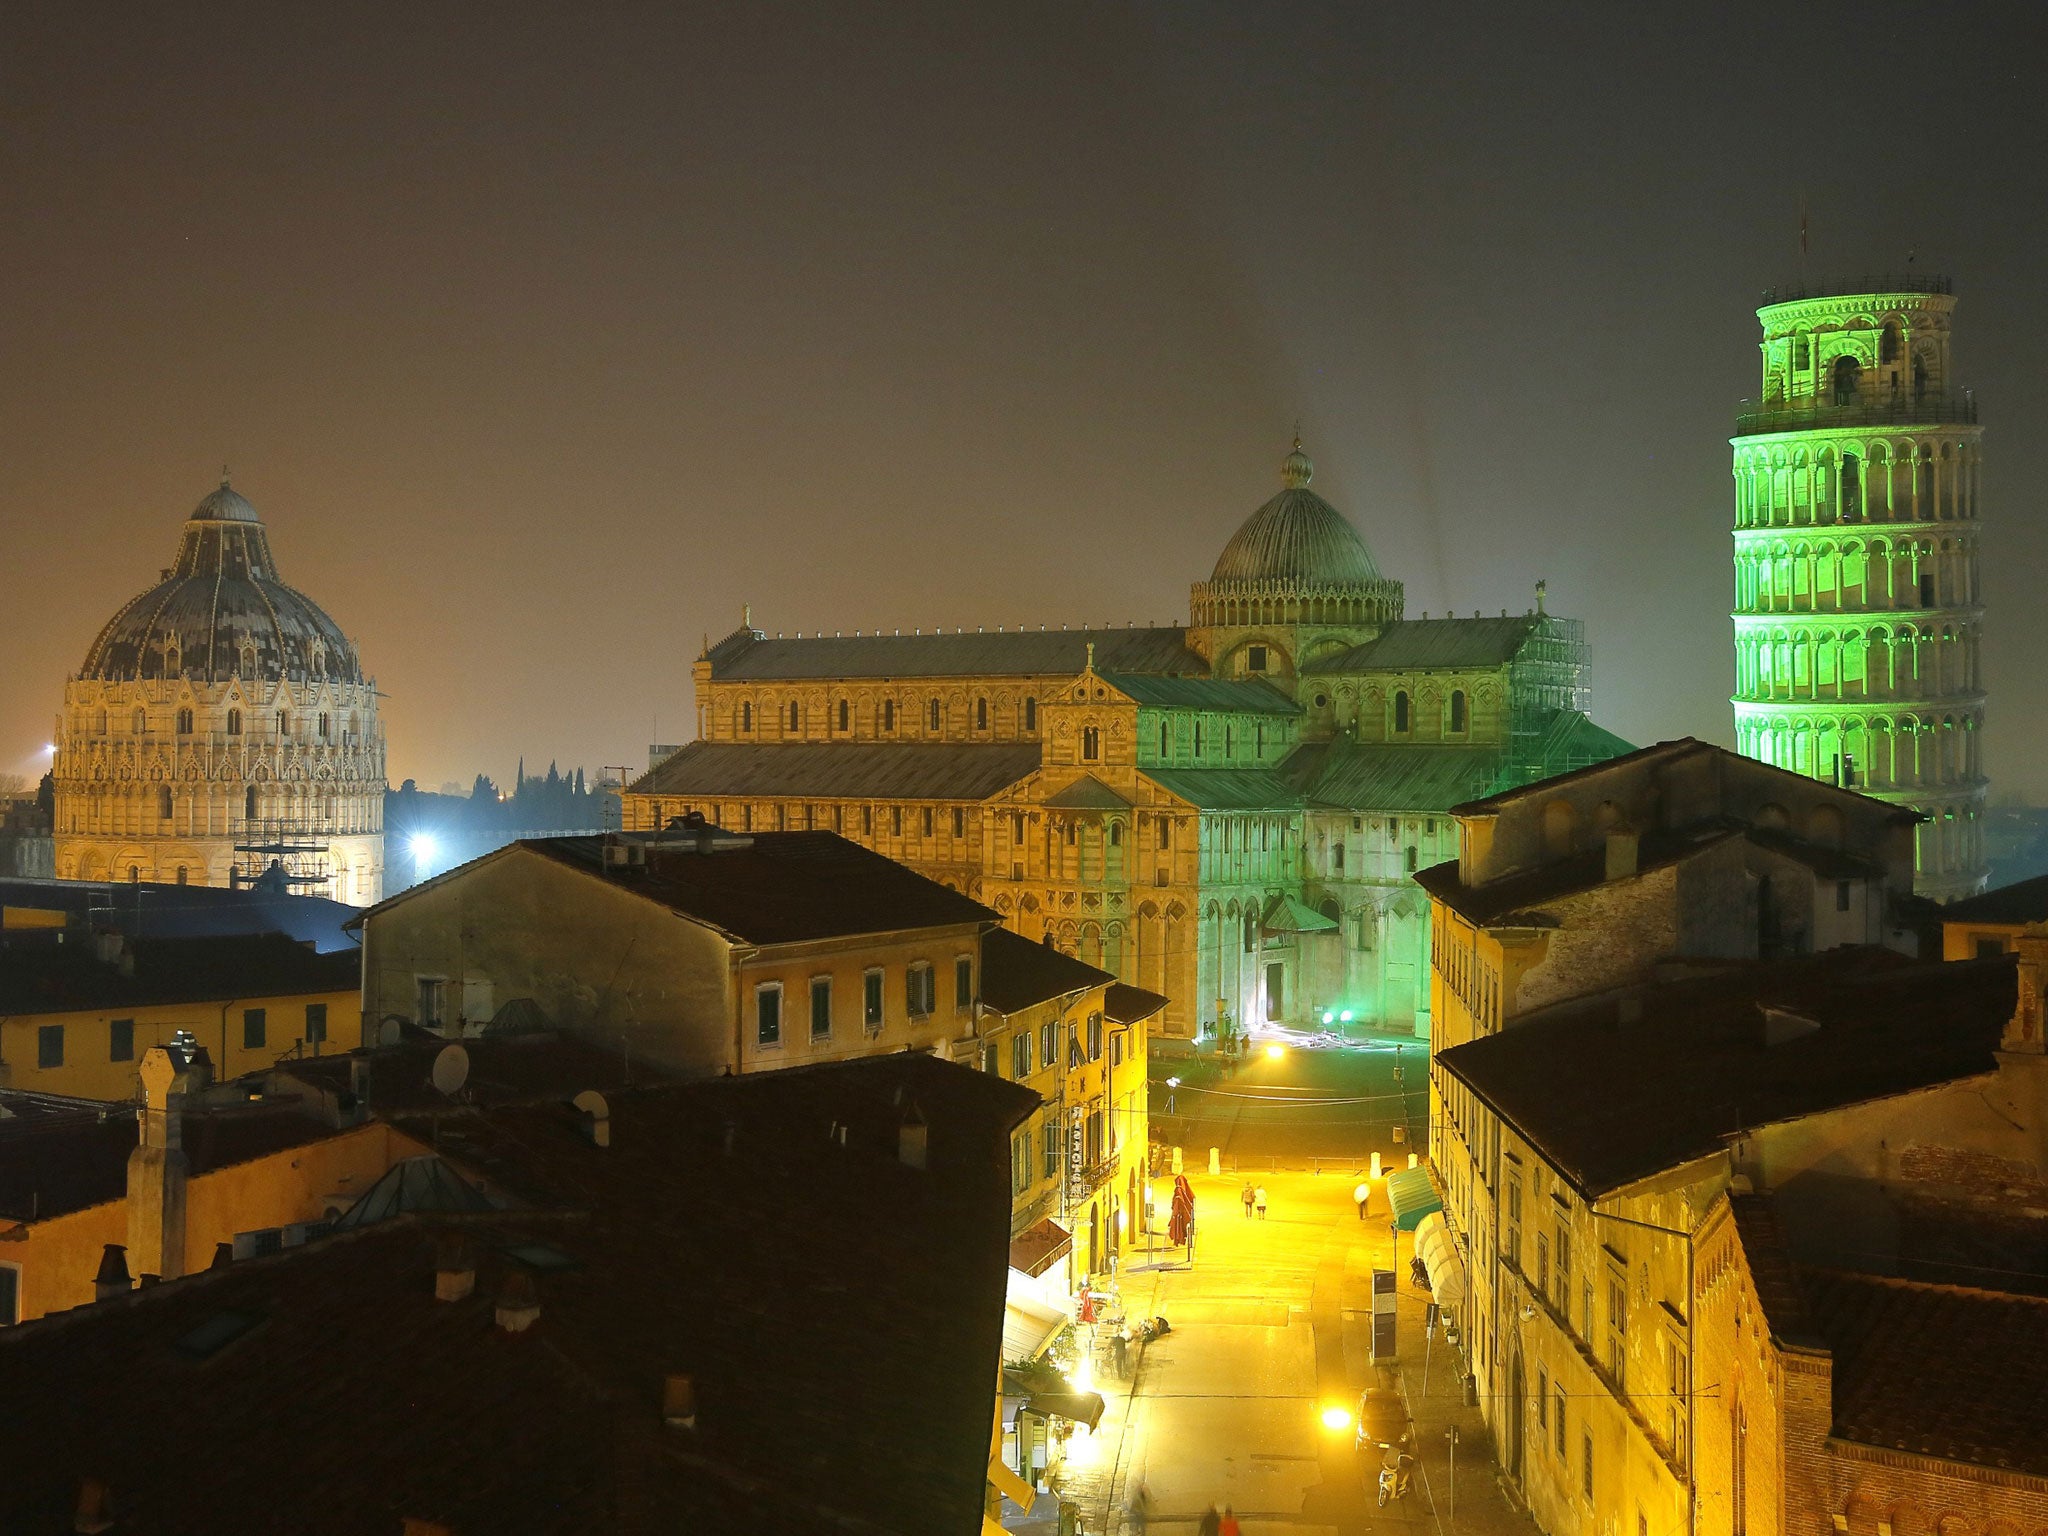 The Italian city of Pisa was one of two destinations where travellers can stay in five-star accommodation for £100 or less